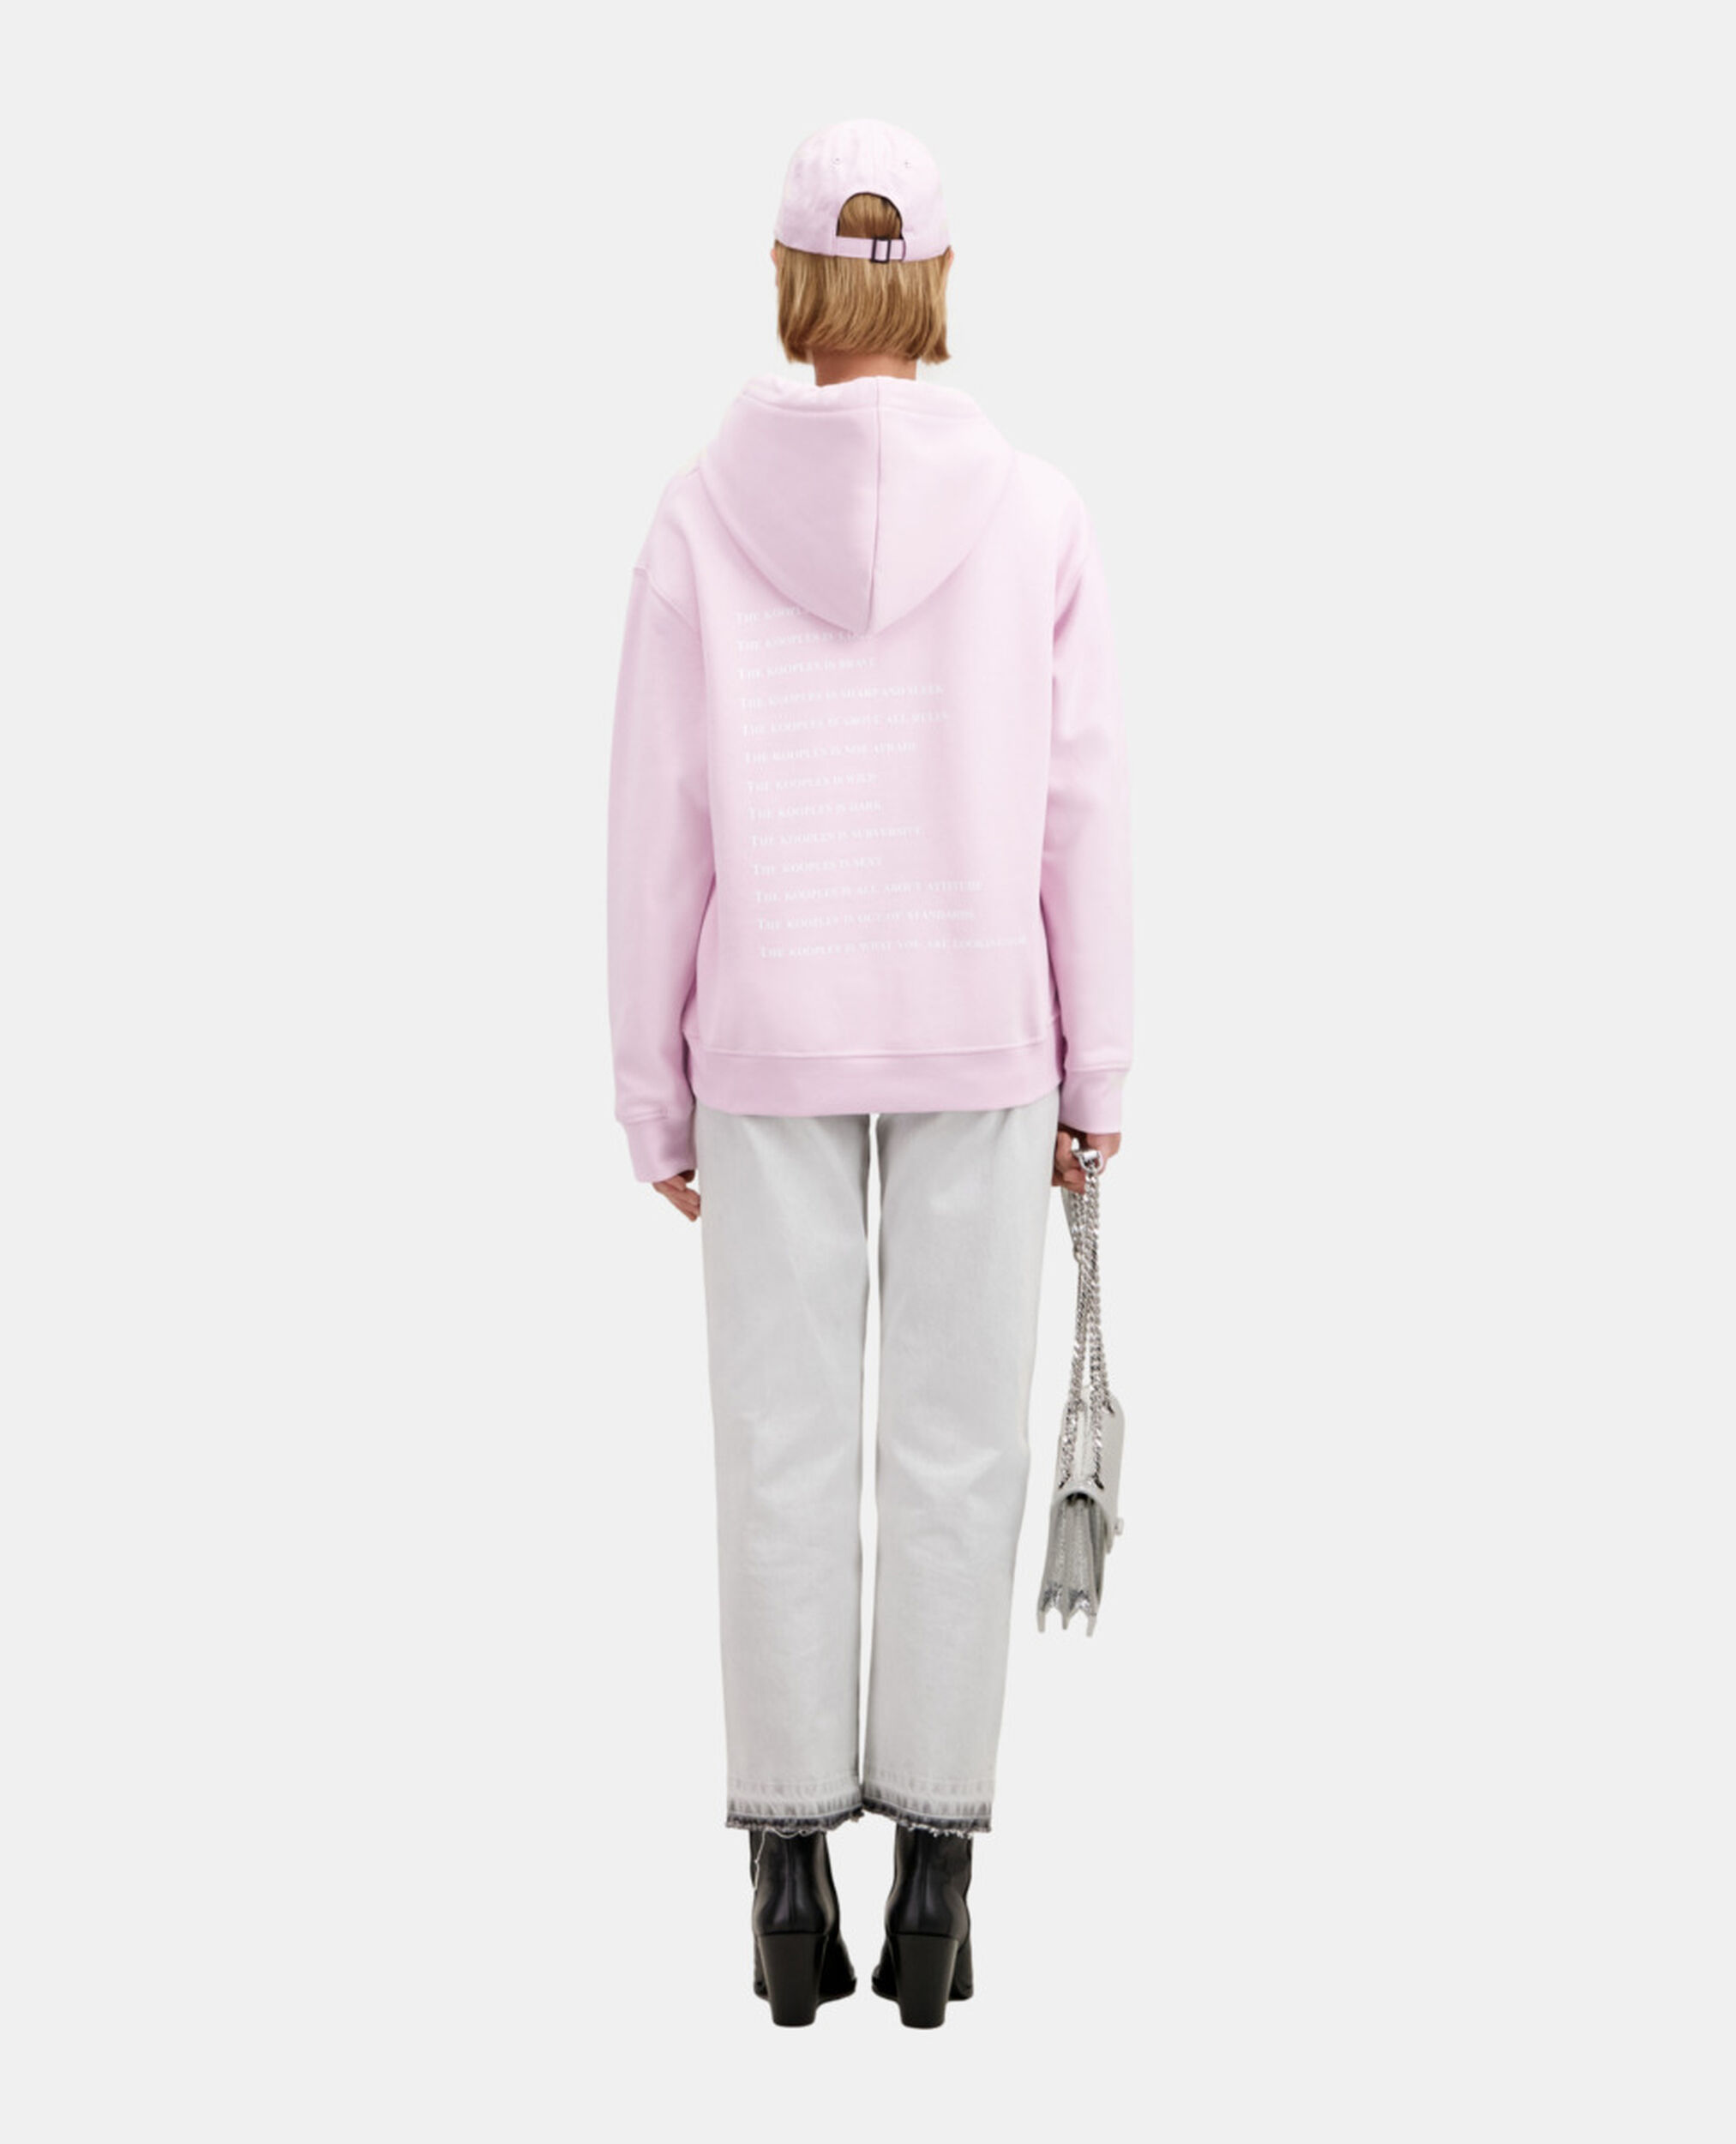 Sweatshirt à capuche What is rose, PALE PINK, hi-res image number null